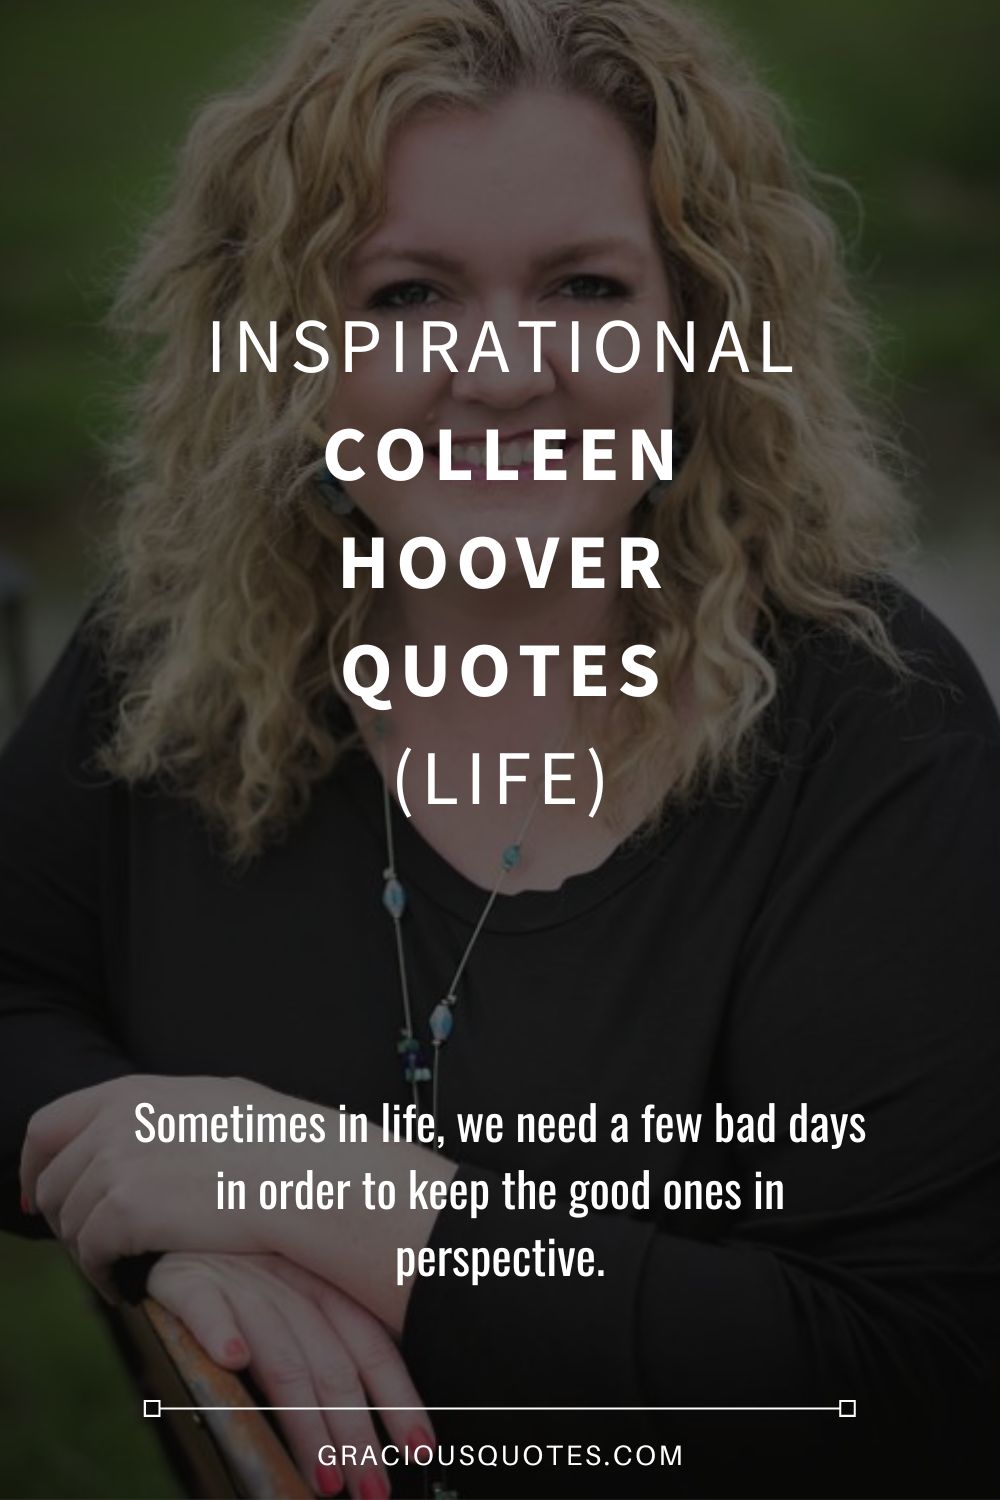 Inspirational Colleen Hoover Quotes (LIFE) - Gracious Quotes